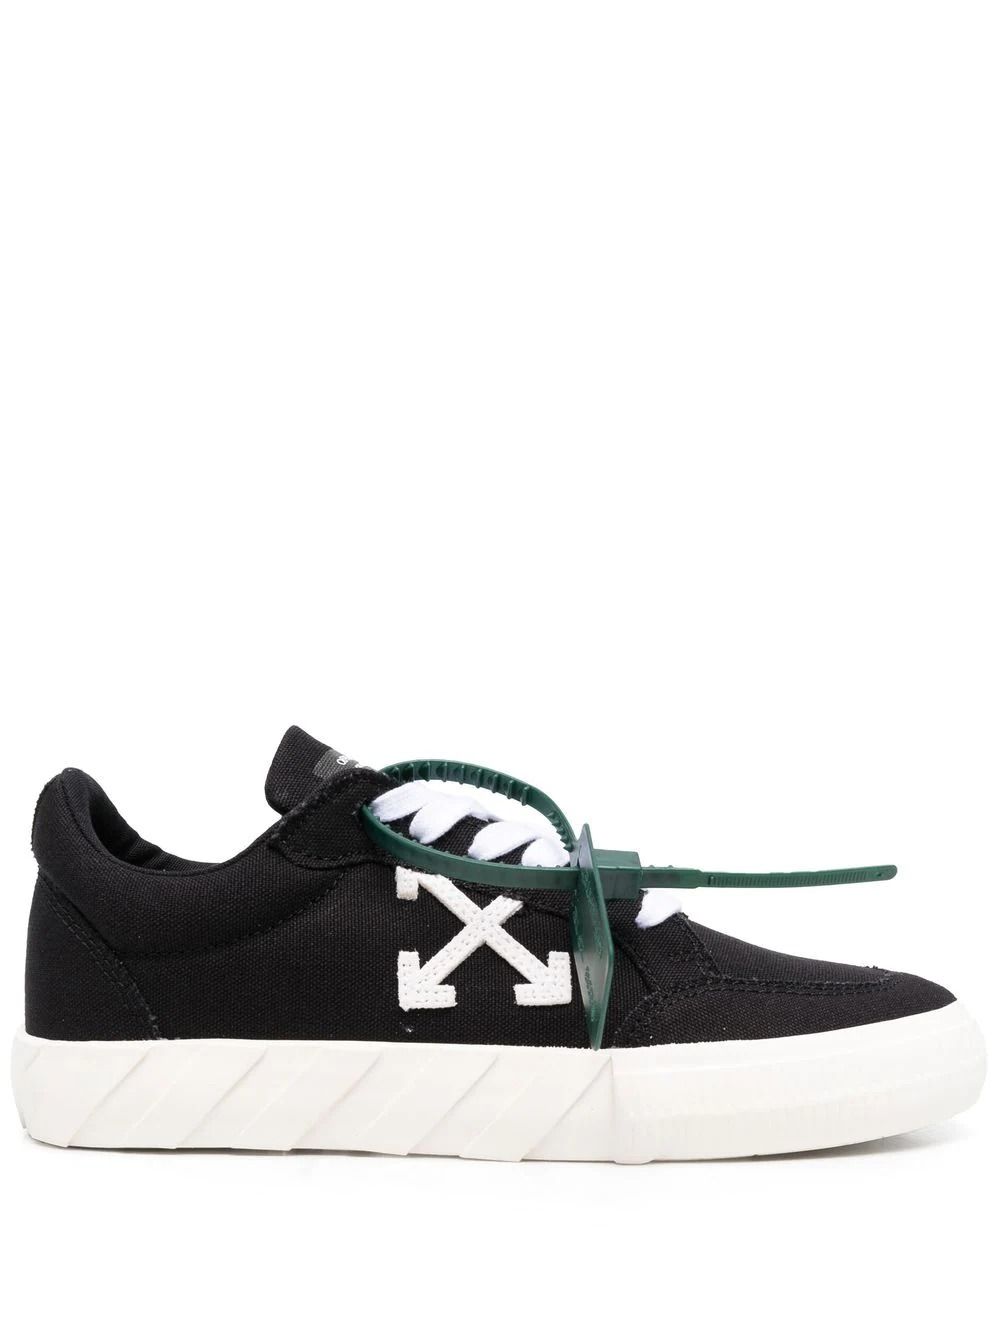 Off-White c/o Virgil Abloh cut Here Jitney 1.4 Leather Top